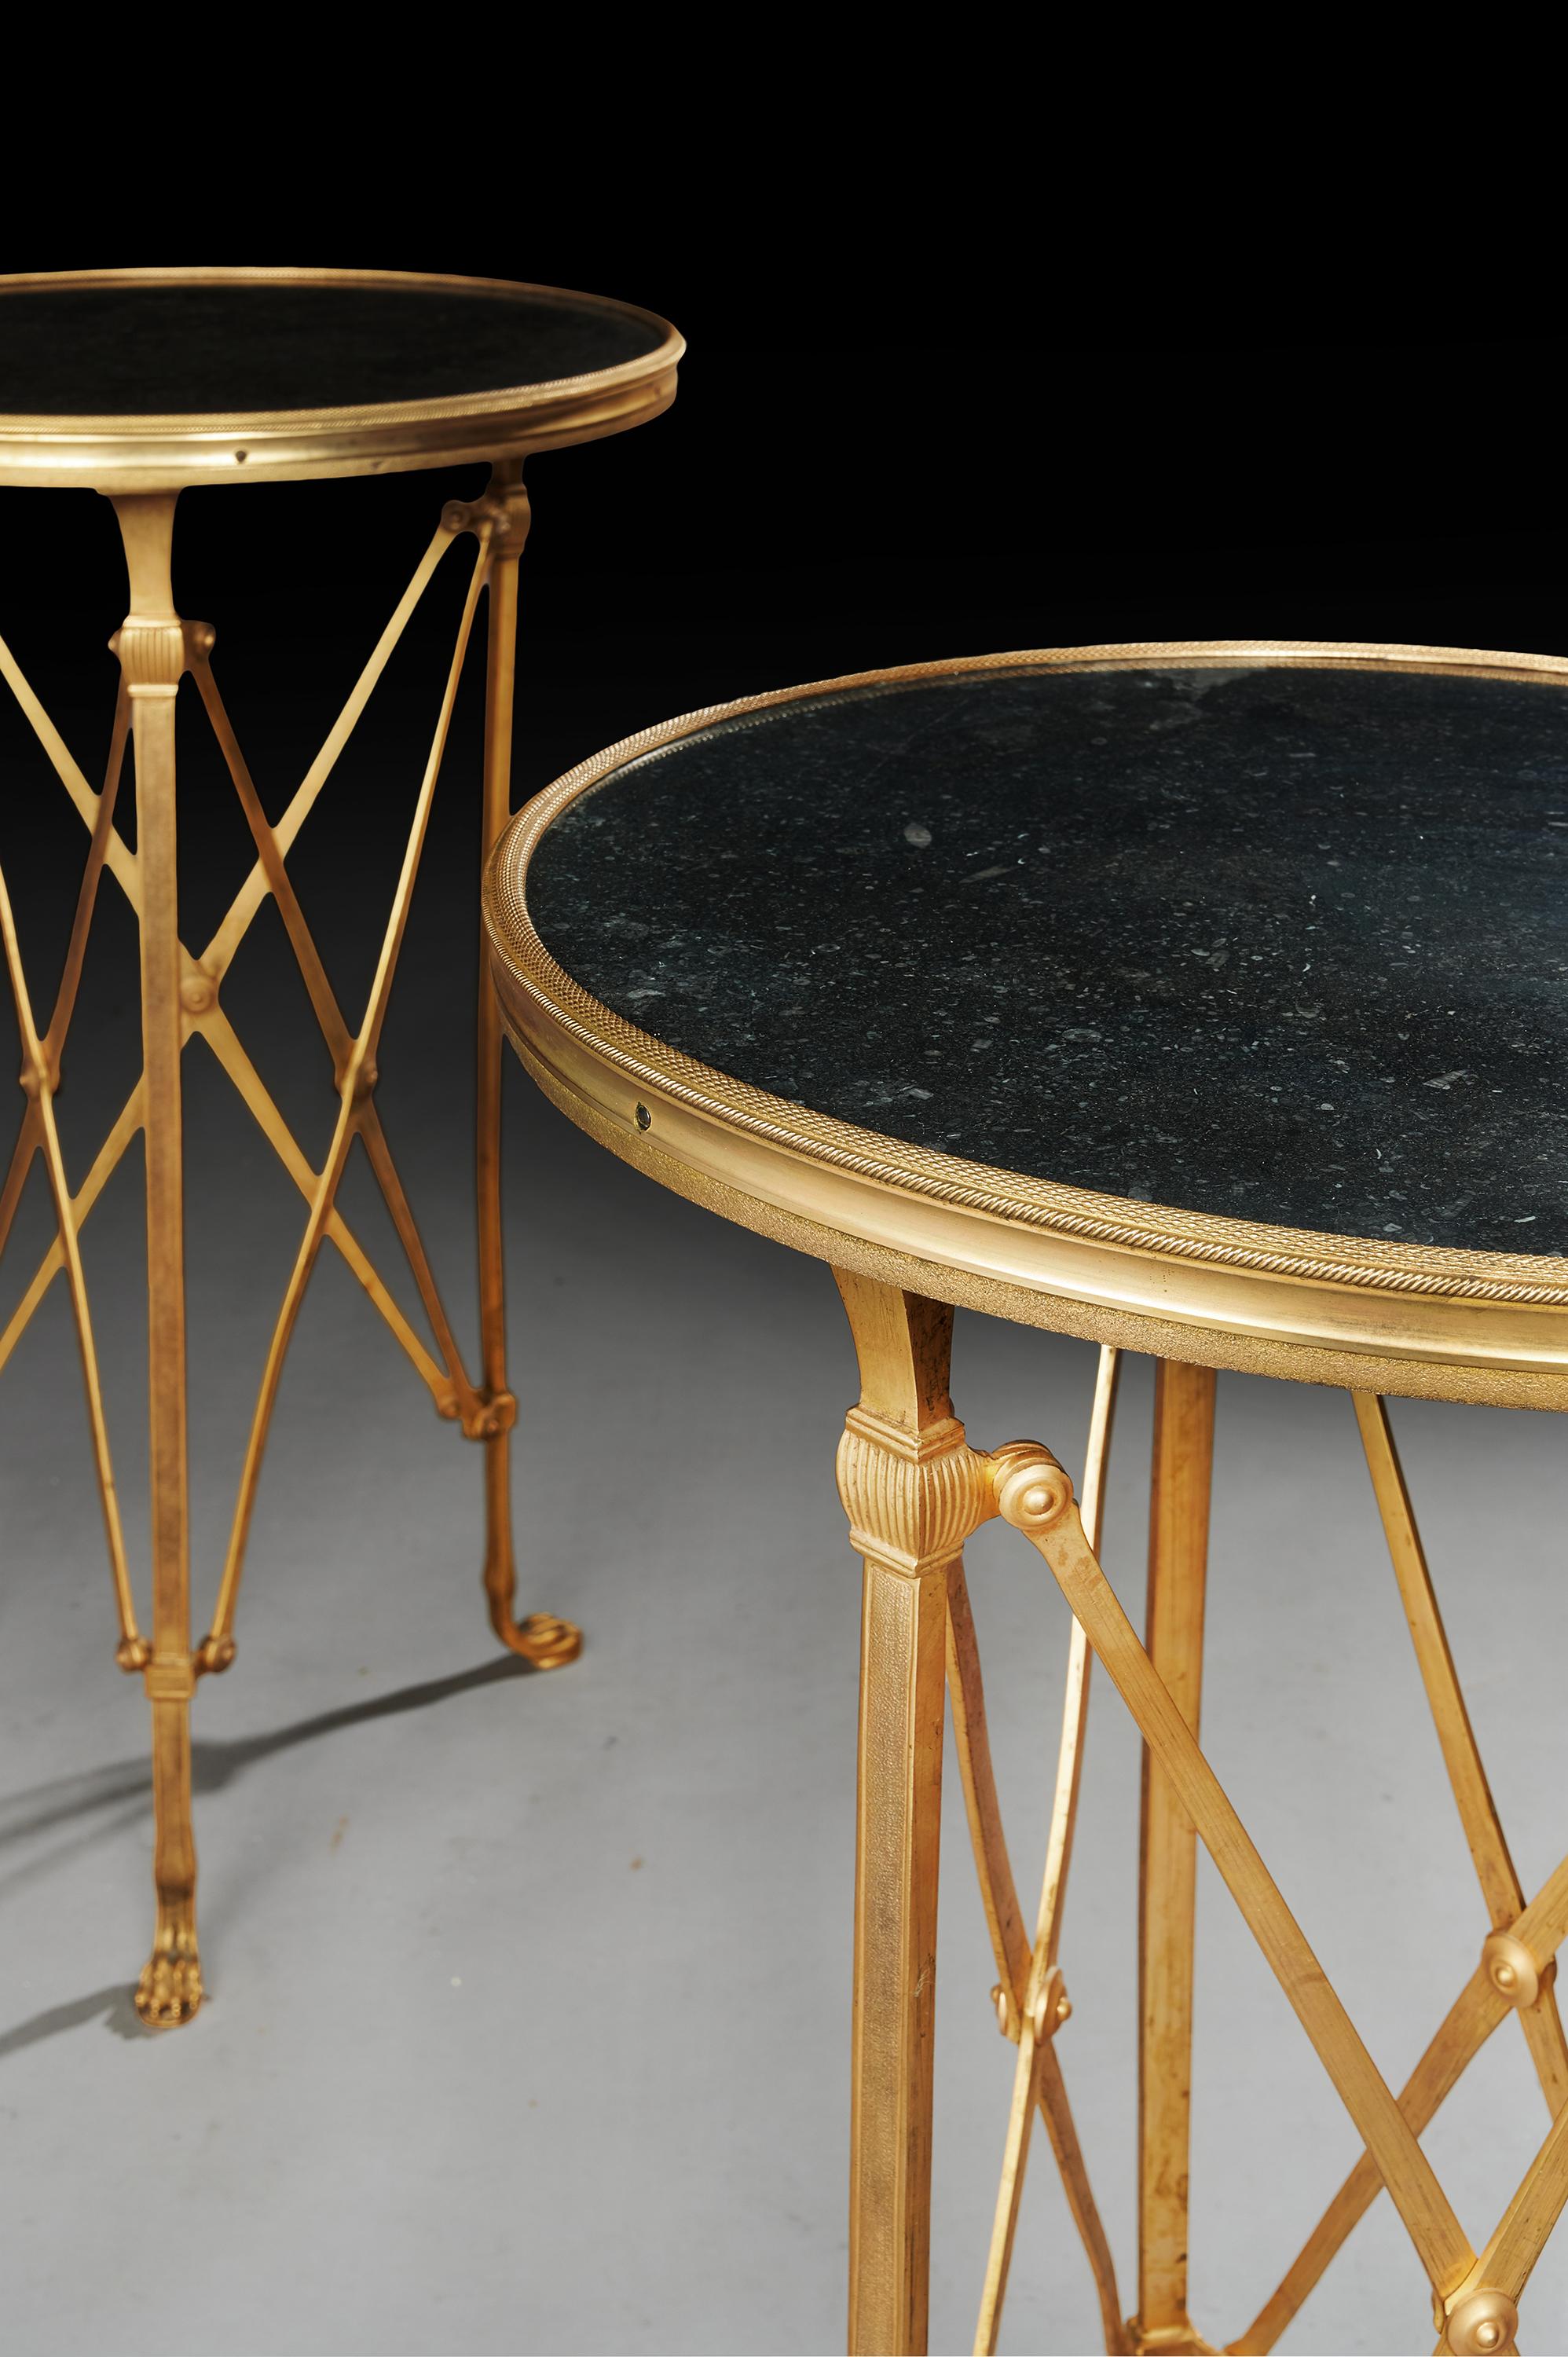 Very fine pair of French gilt bronze and Belgium black fossil marble gueridon tables in the neoclassical taste.

French circa 1900-1920.

Finely cast pair of French gilt bronze guerdon - side tables having a inset black Belgium fossilised marble